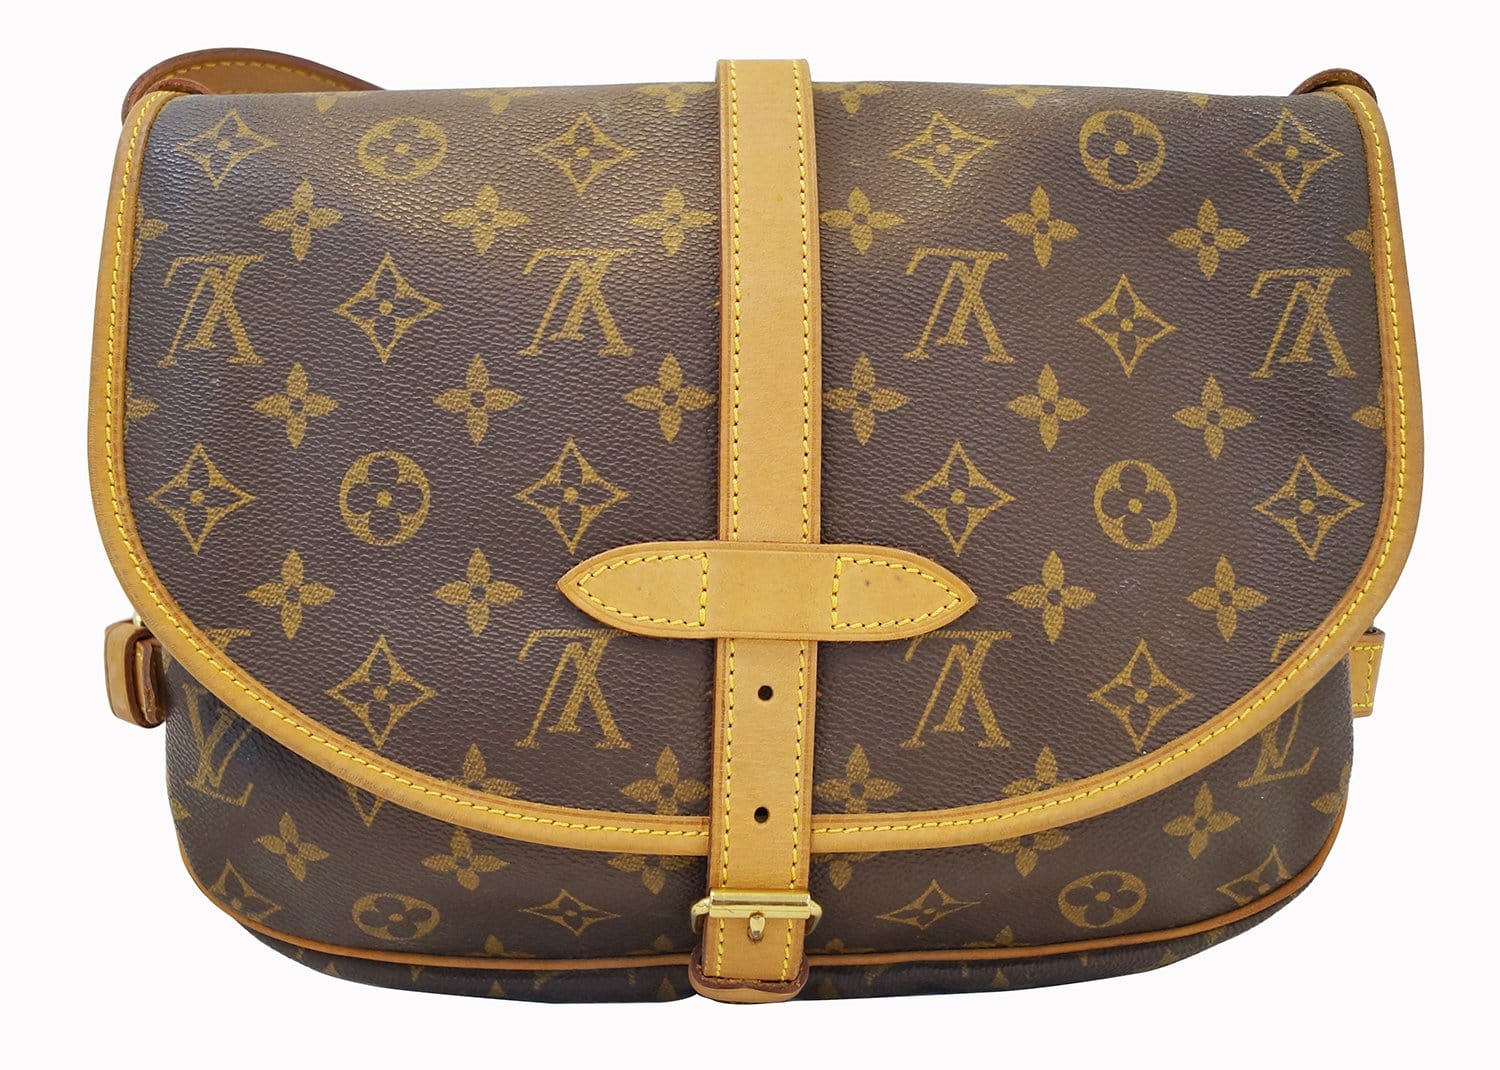 LOUIS VUITTON. Bag in monnogrammed coated canvas and smo…